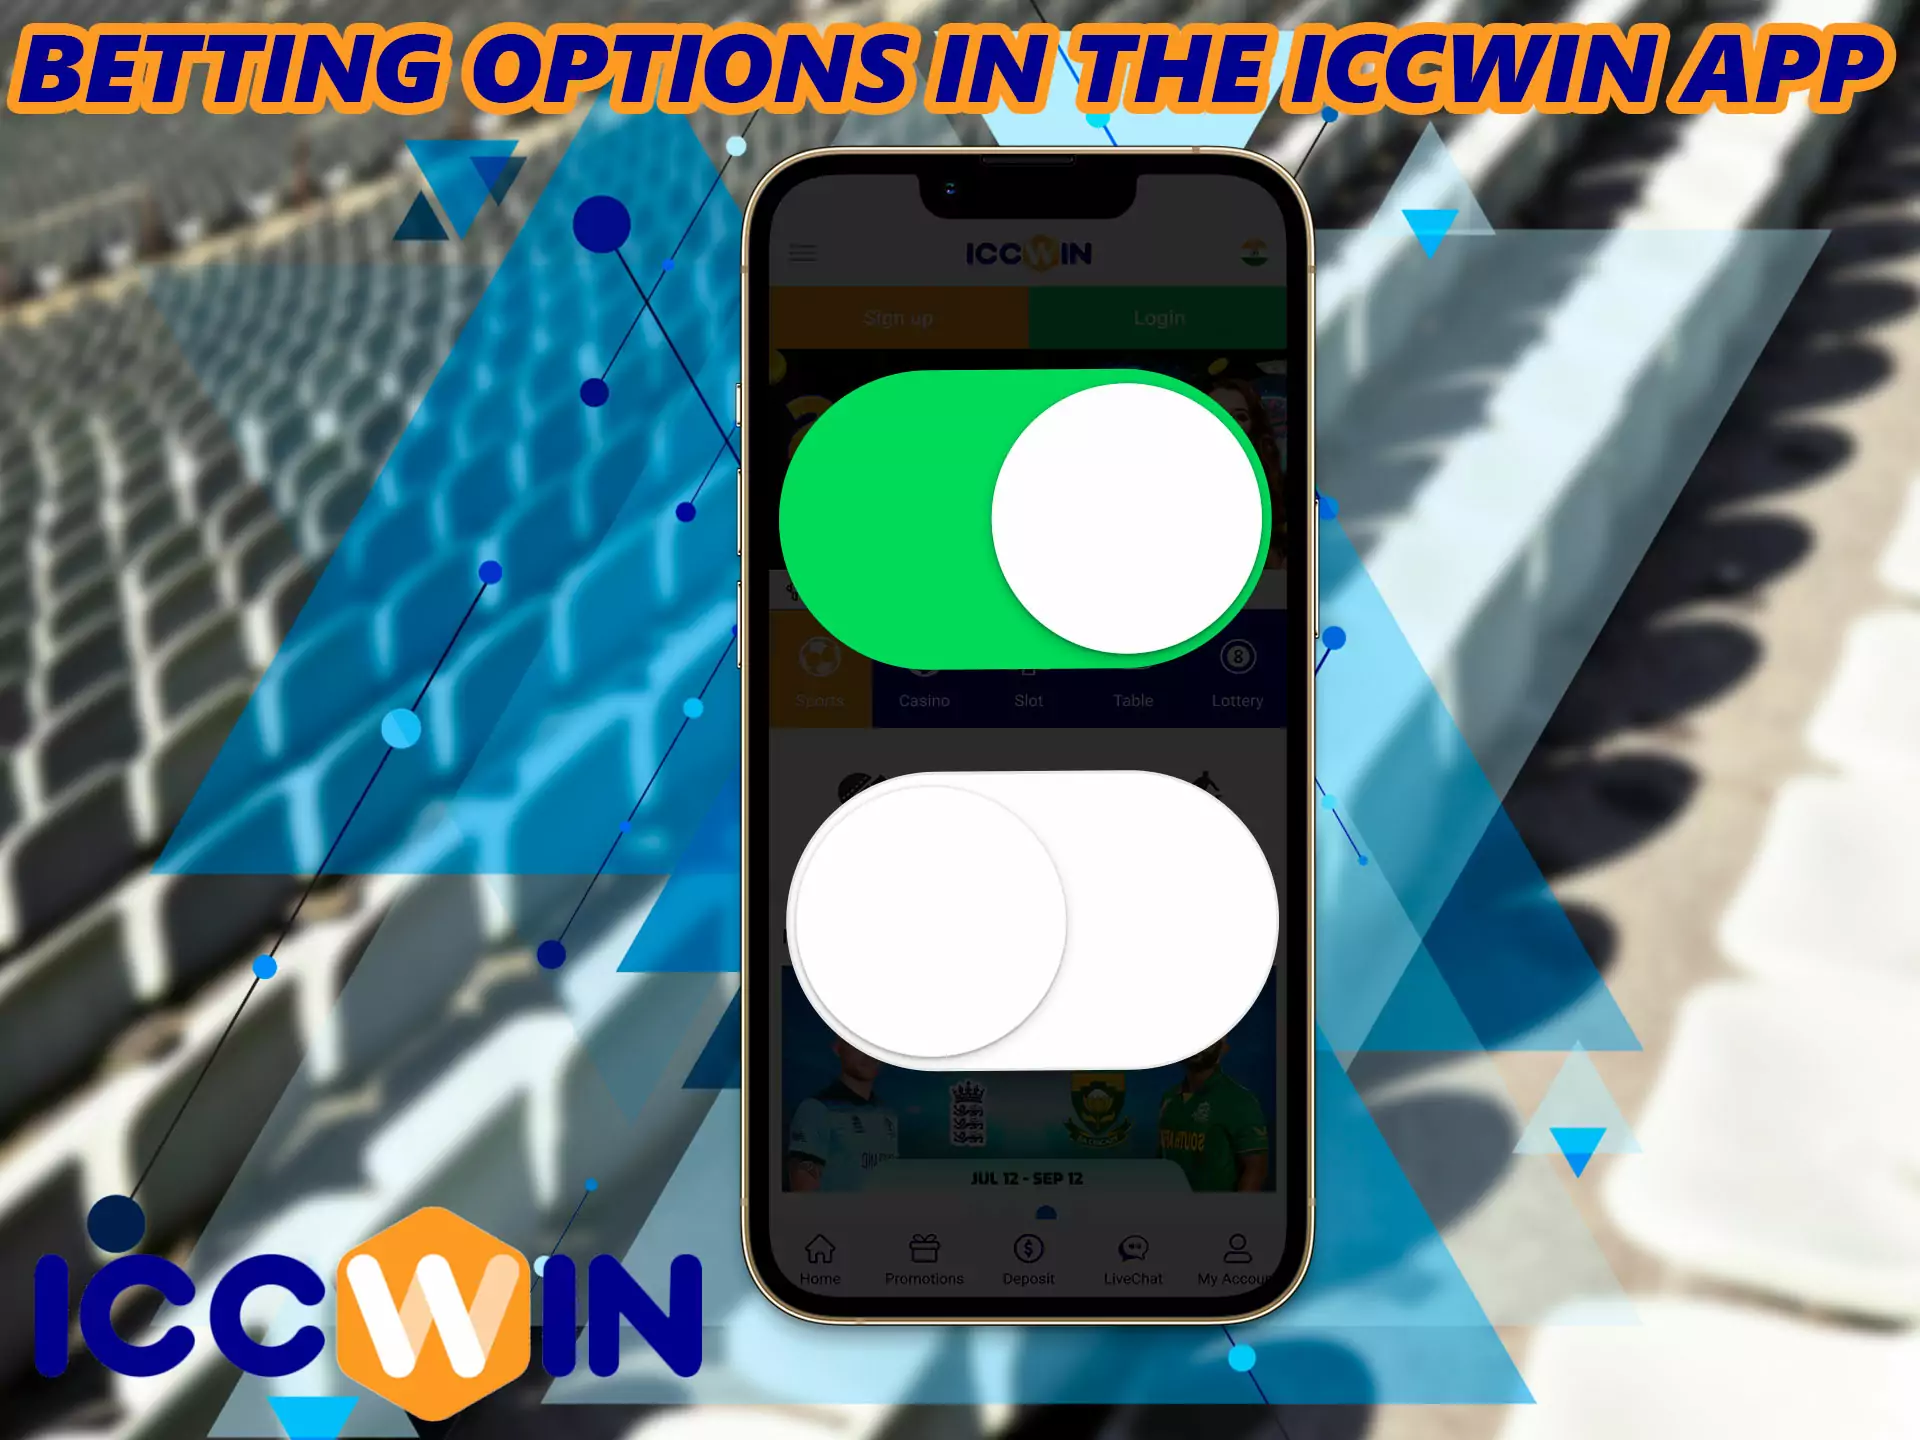 In the ICCWin app, you find many betting options.